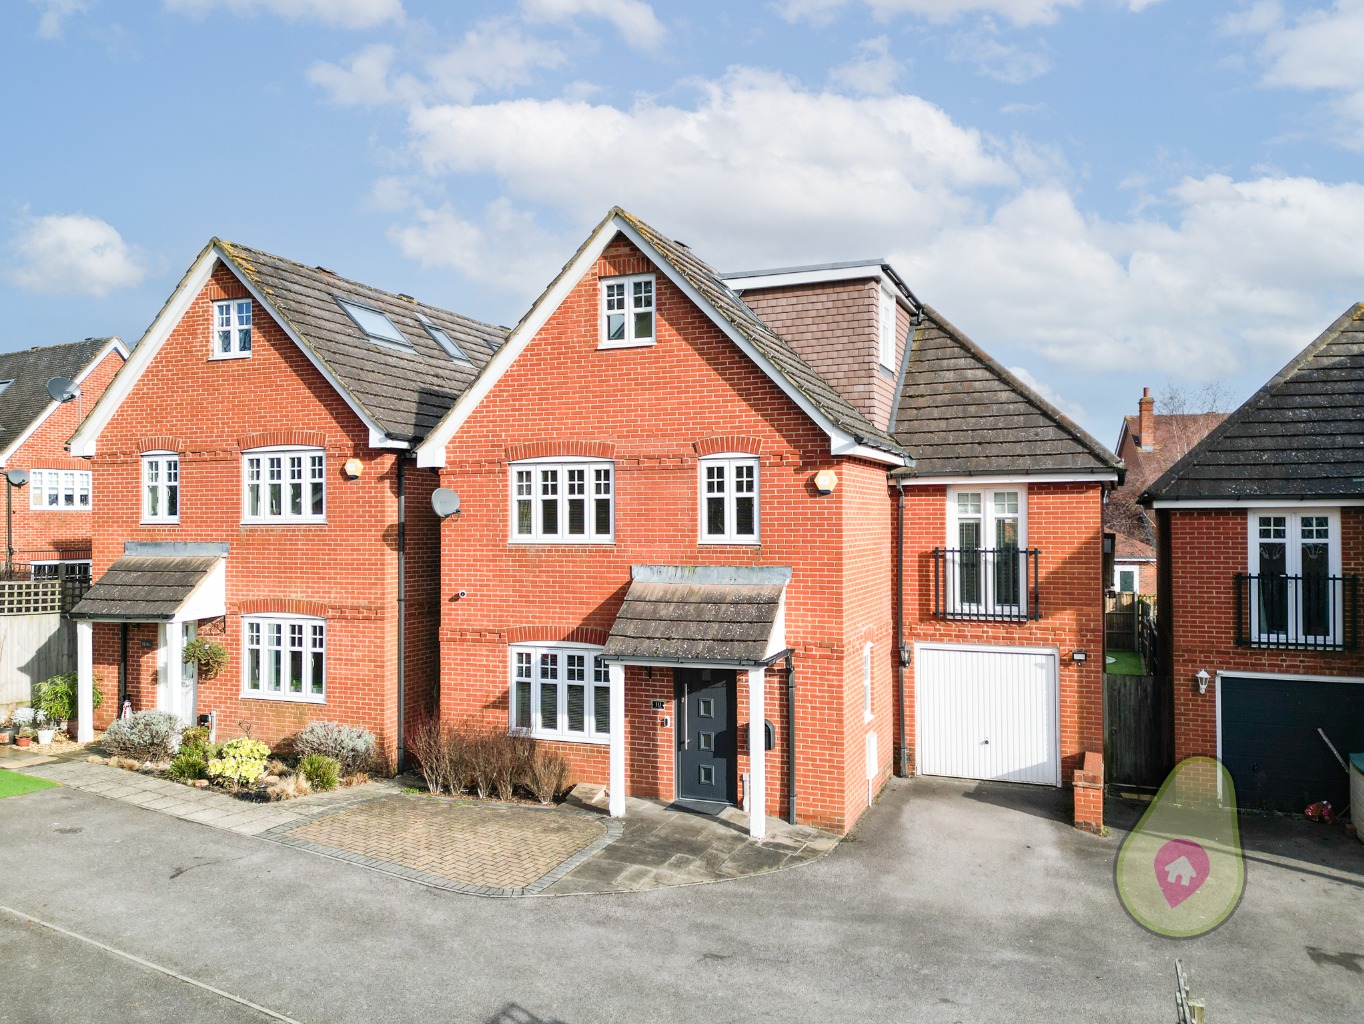 5 bed detached house for sale in Teal Grove, Reading - Property Image 1